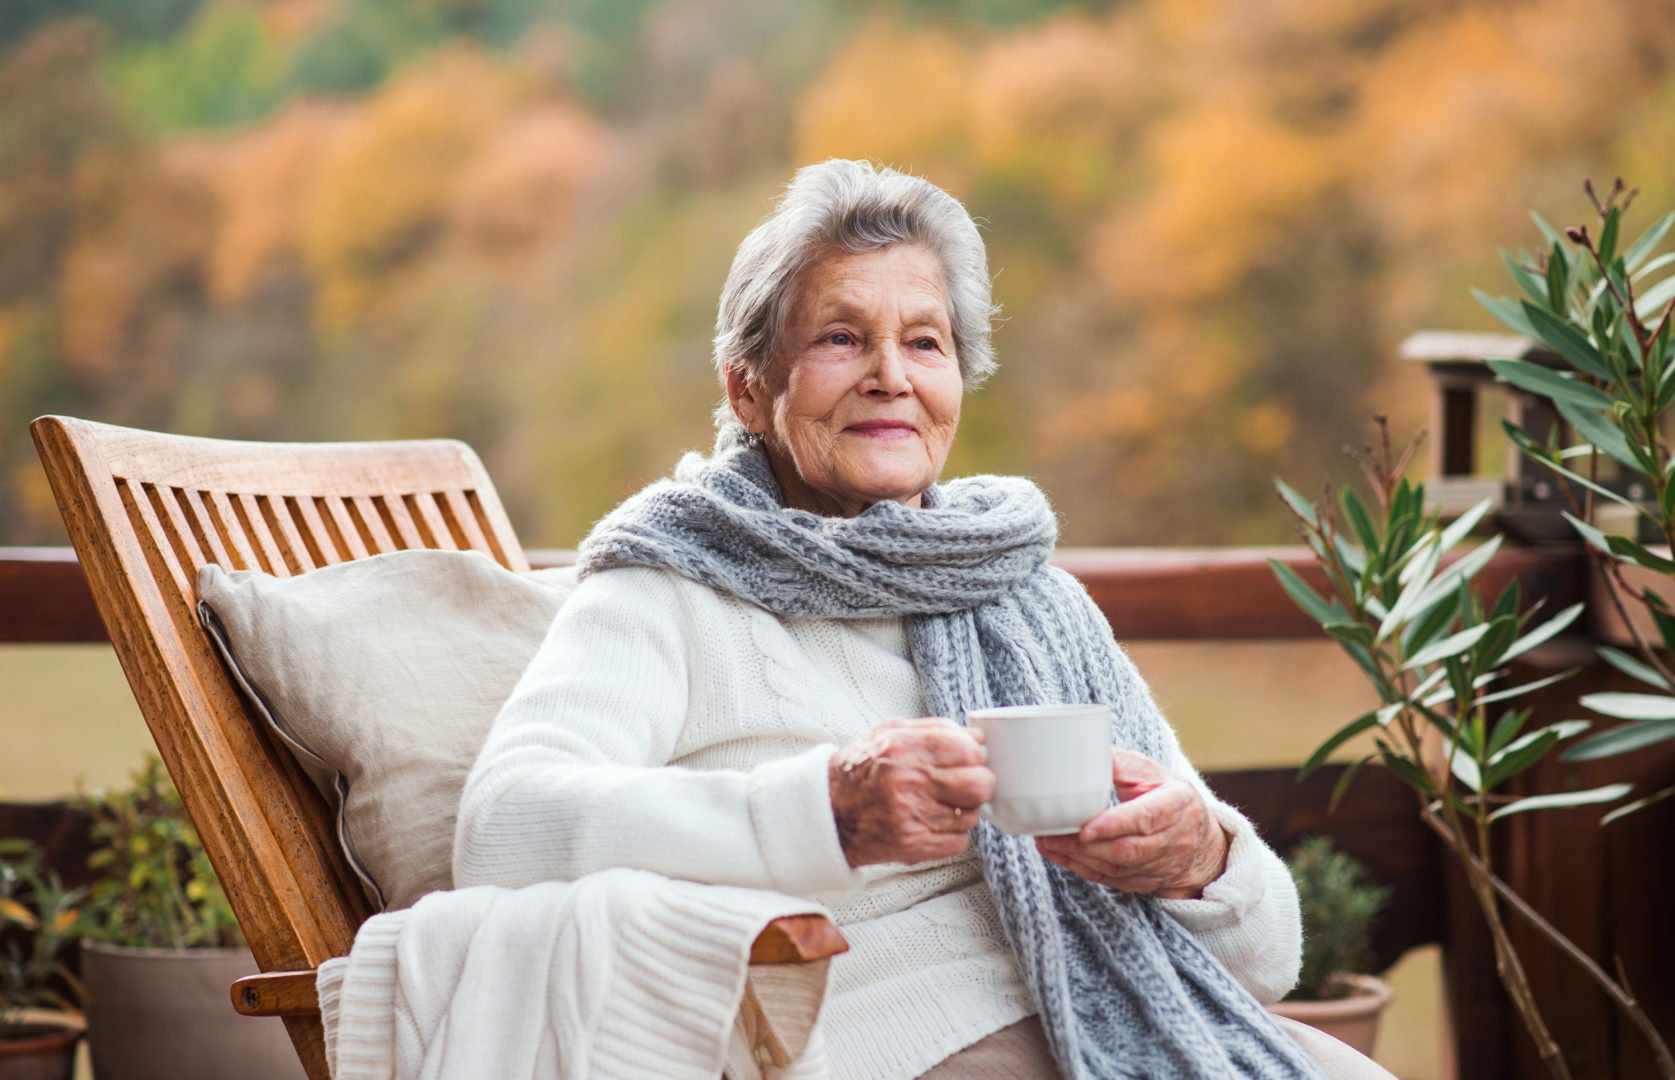 An elderly senior woman sitting outdoors on a terrace in on a sunny day in autumn.